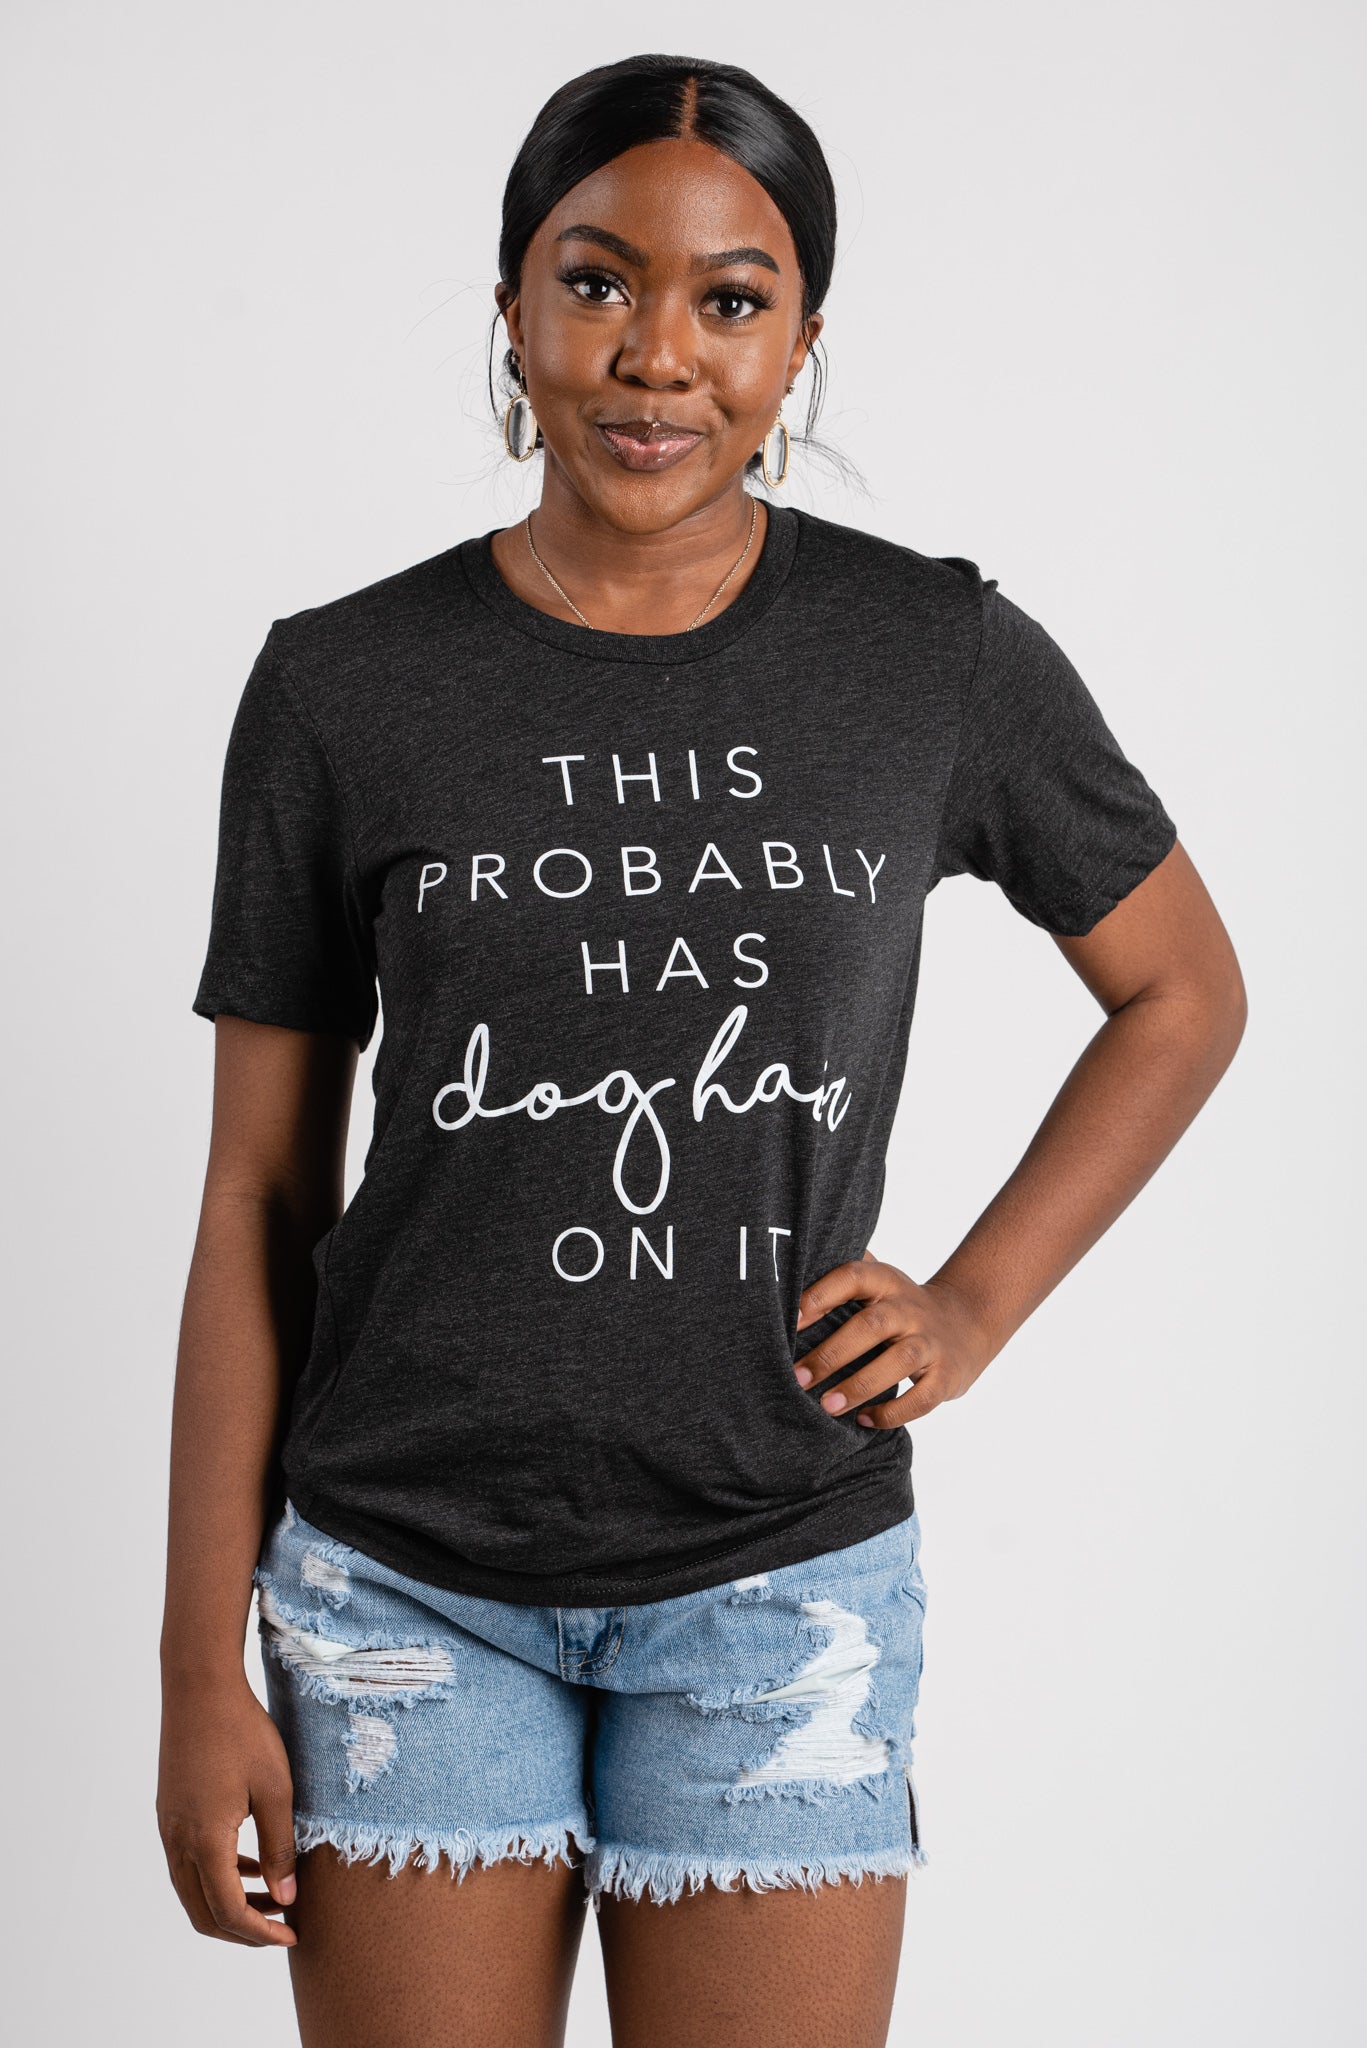 This probably has dog hair on it unisex short sleeve t-shirt charcoal - Stylish T-shirts - Trendy Graphic T-Shirts and Tank Tops at Lush Fashion Lounge Boutique in Oklahoma City